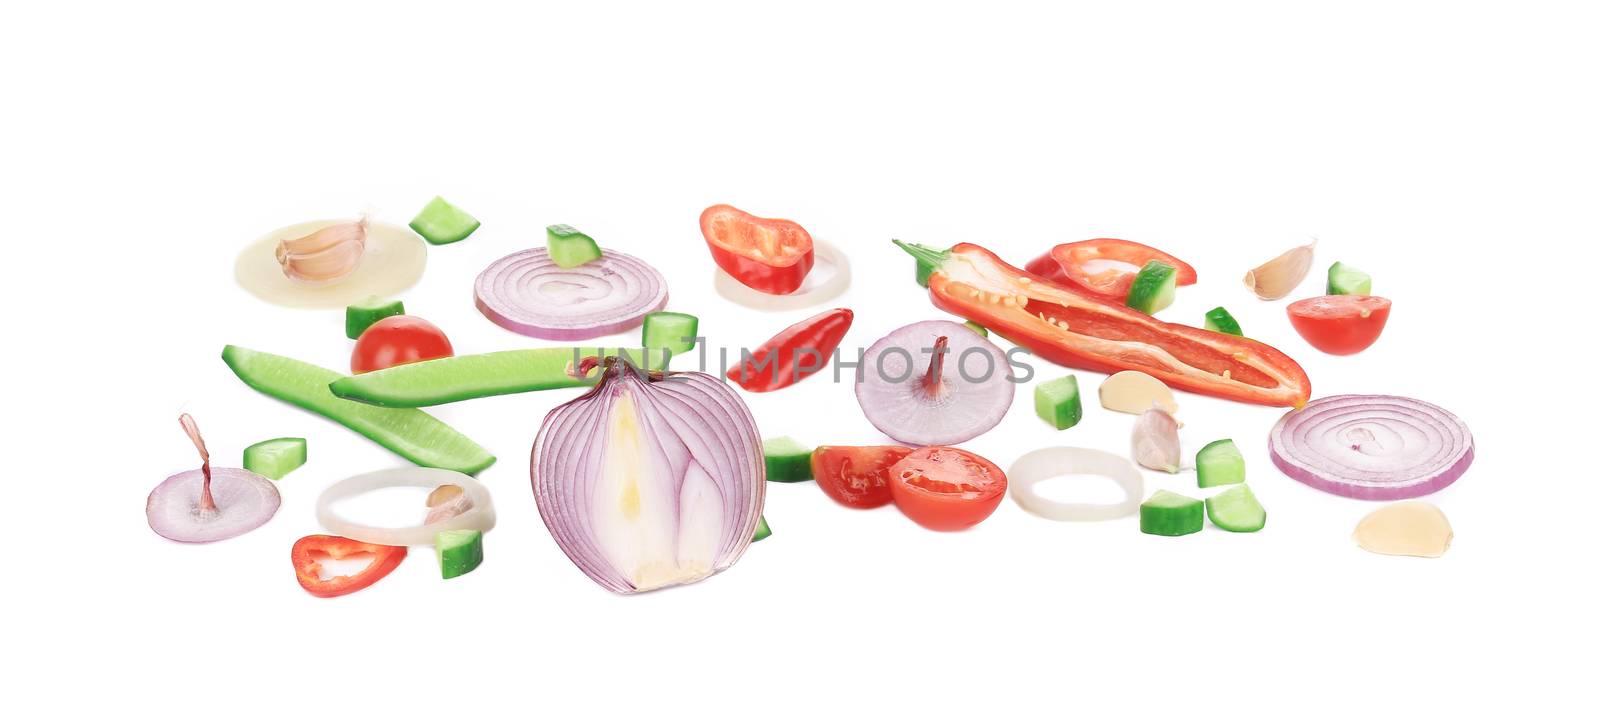 Sliced raw vegetables. Isolated on a white background.